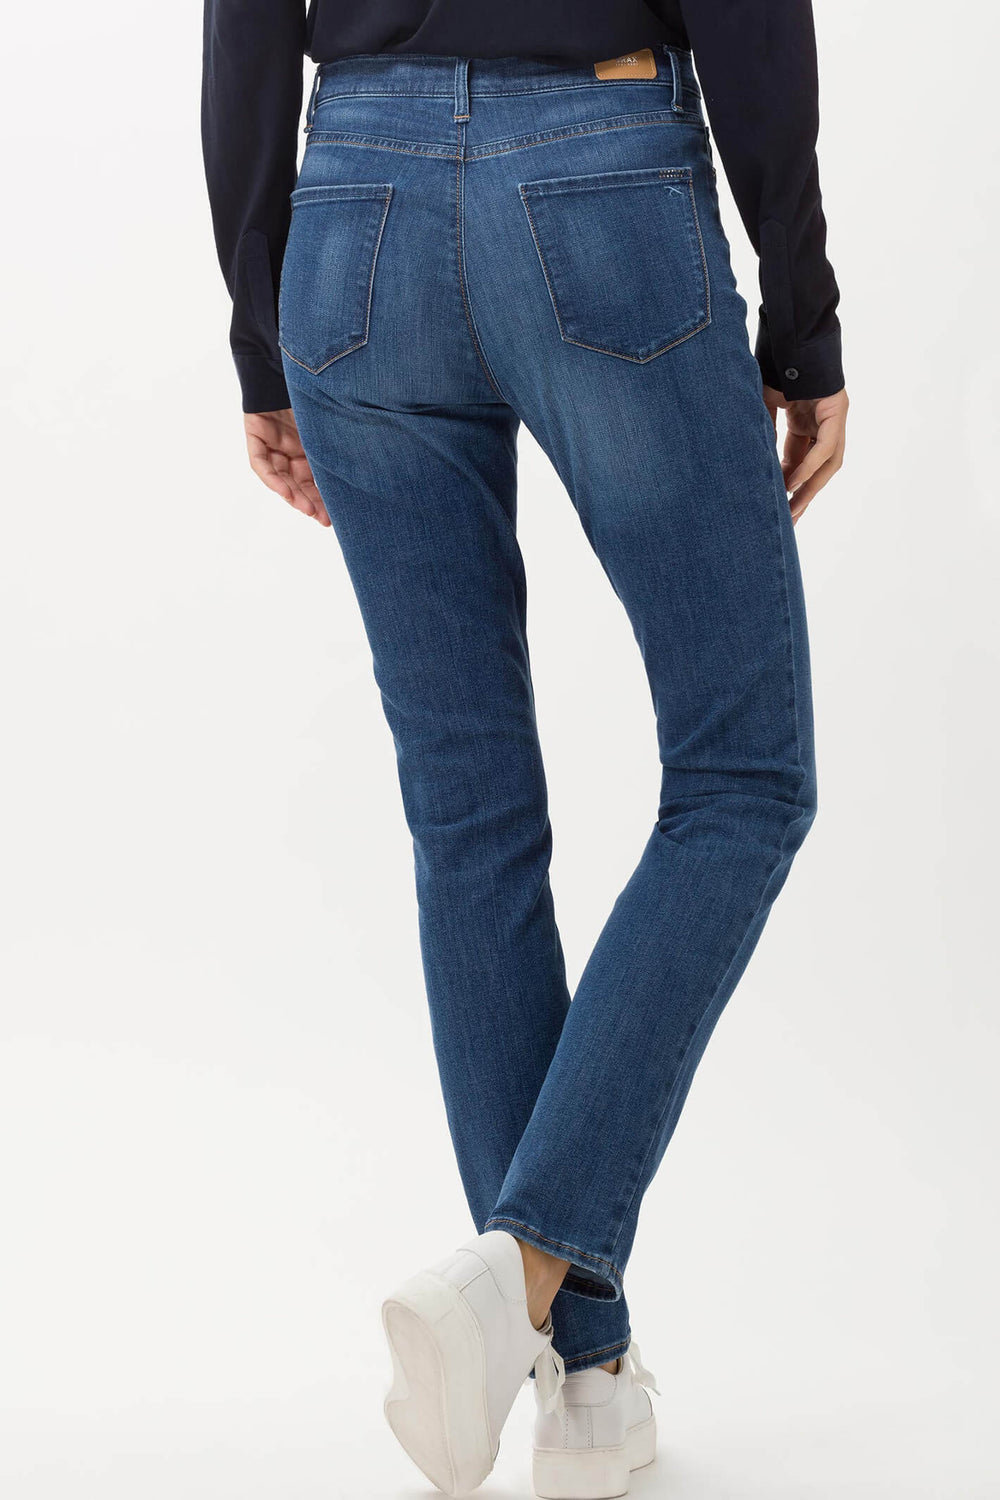 Brax Mary 74-4007-26 Blue Planet Used Blue Jeans - Shirley Allum Boutique